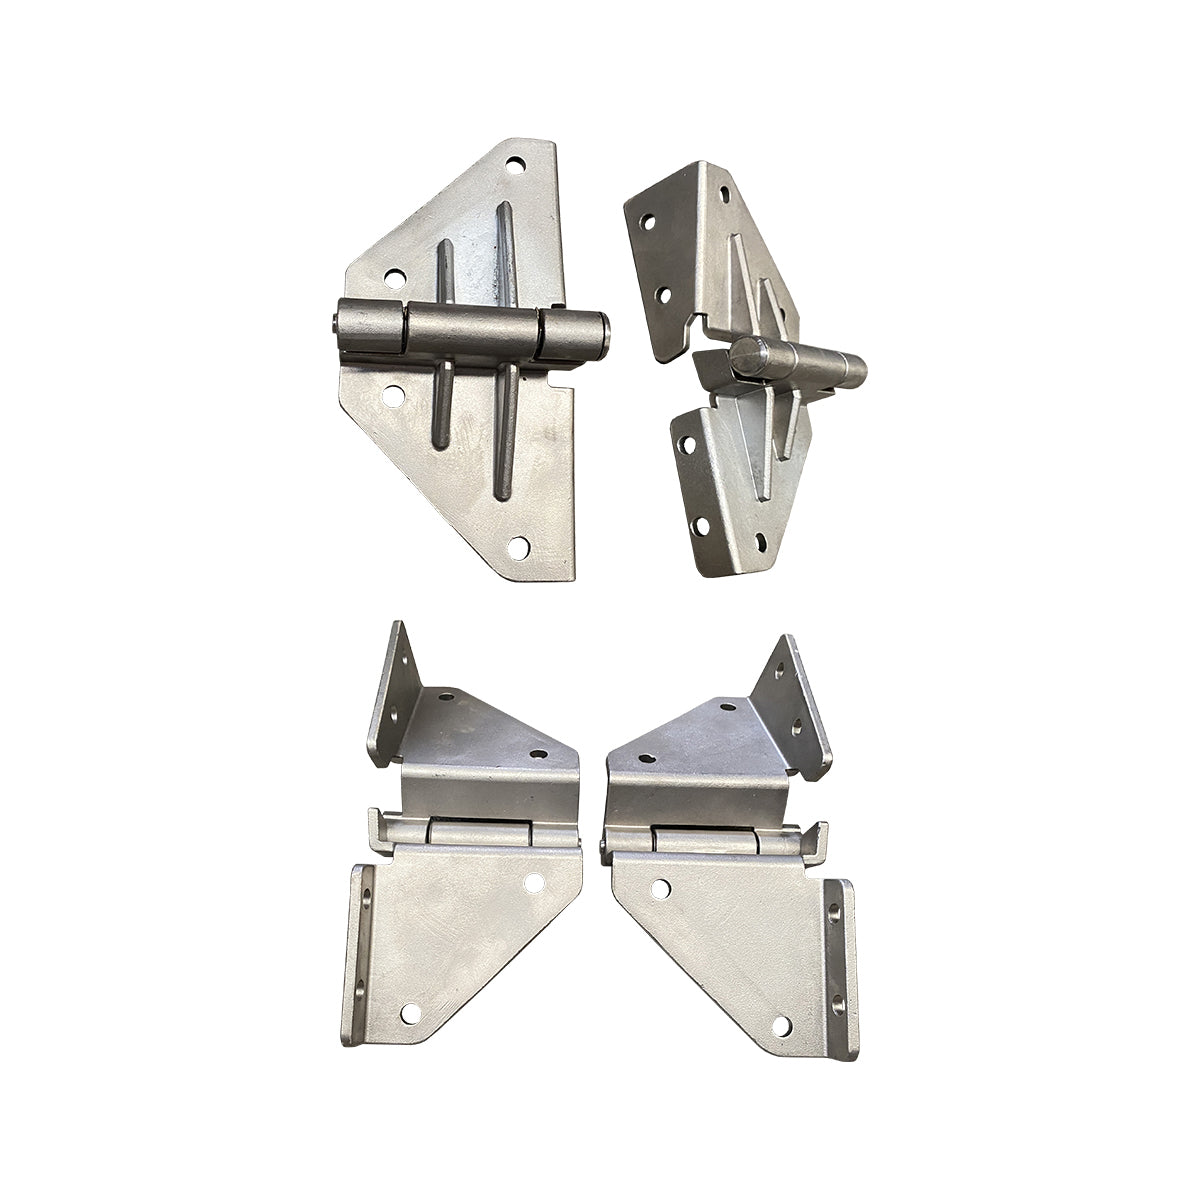 Windshield frame hinges, LH and RH, Stainless Steel, for FJ40, FJ45 Toyota Land Cruiser